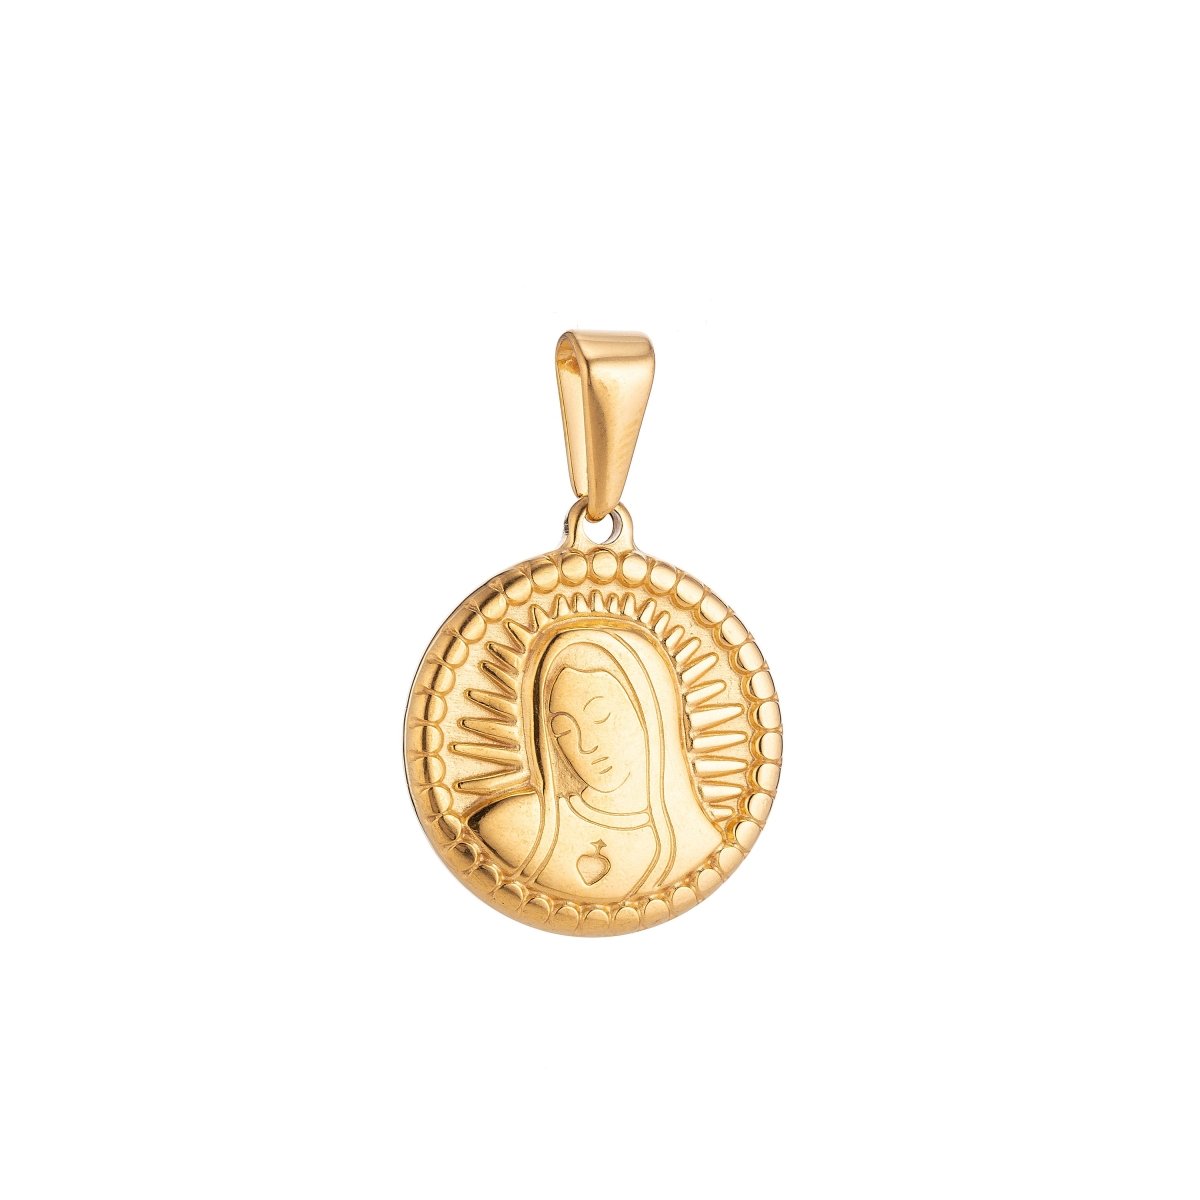 Gold Filled Stainless Steel Mary Mother Jesus Glooming Charm Pendant w/ Bails Findings for Earring Necklace Jewelry Making Supplies J-349 - DLUXCA